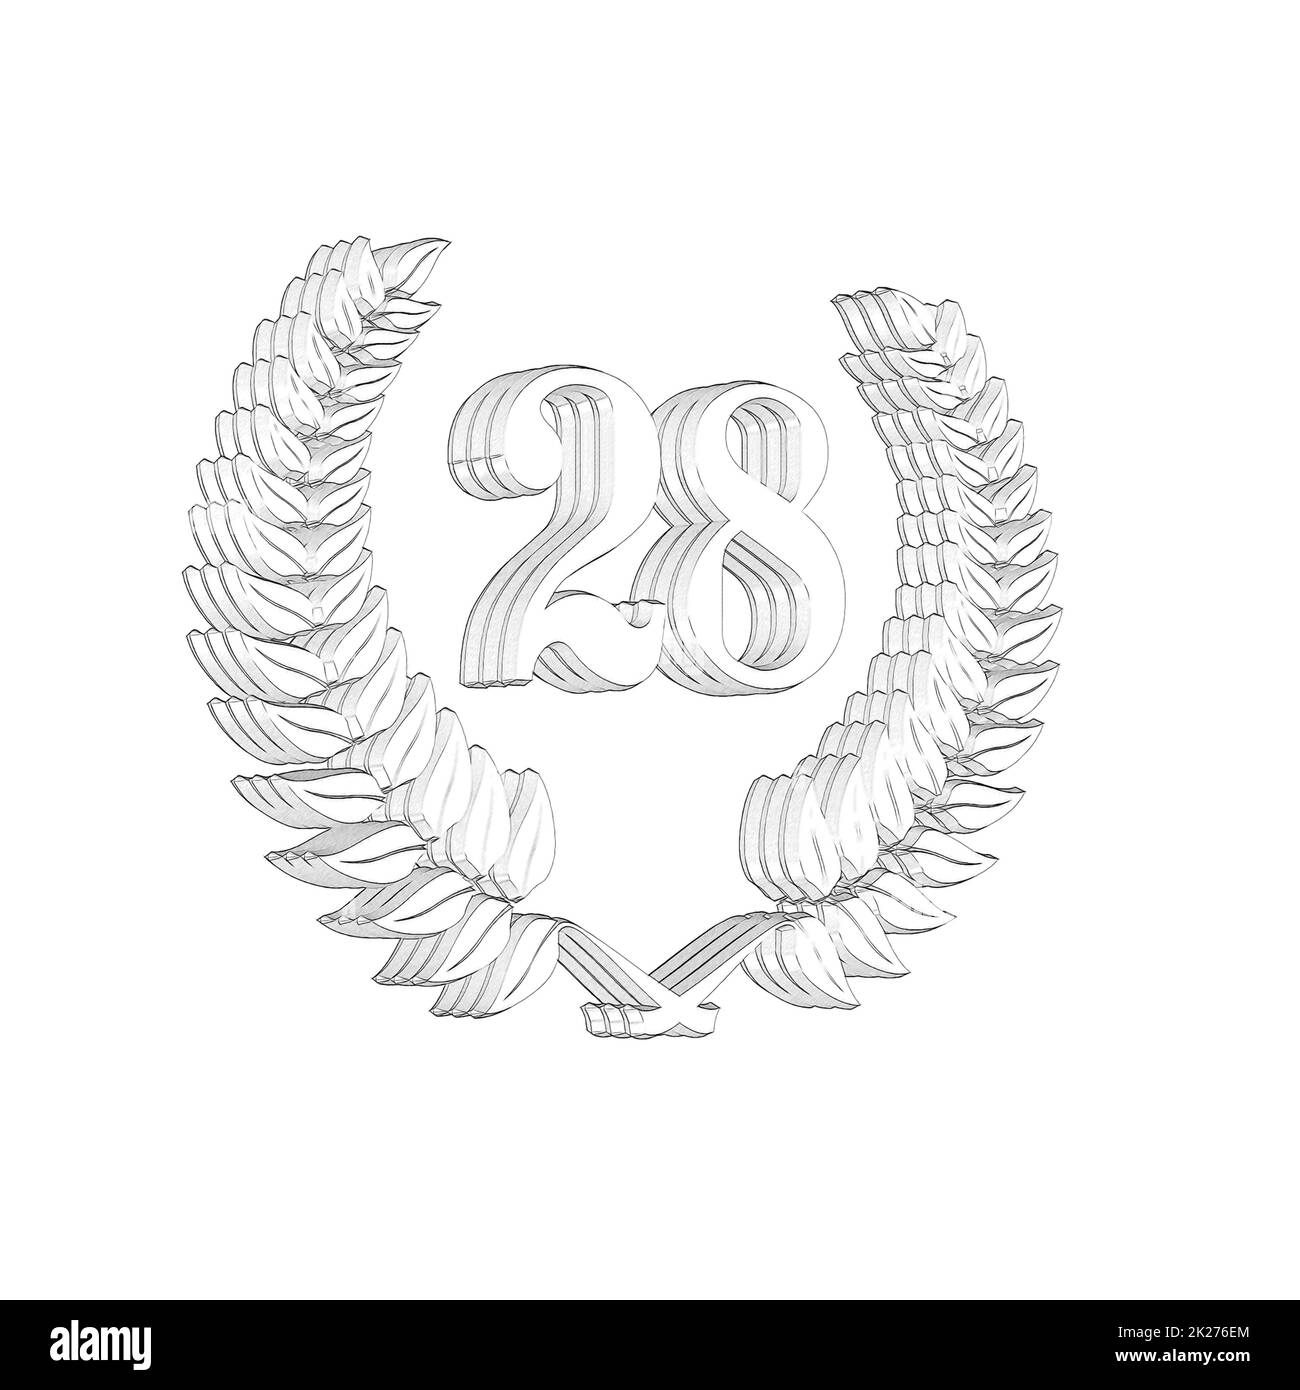 Number 28 with laurel wreath or honor wreath as a 3D-illustration, 3D-rendering Stock Photo